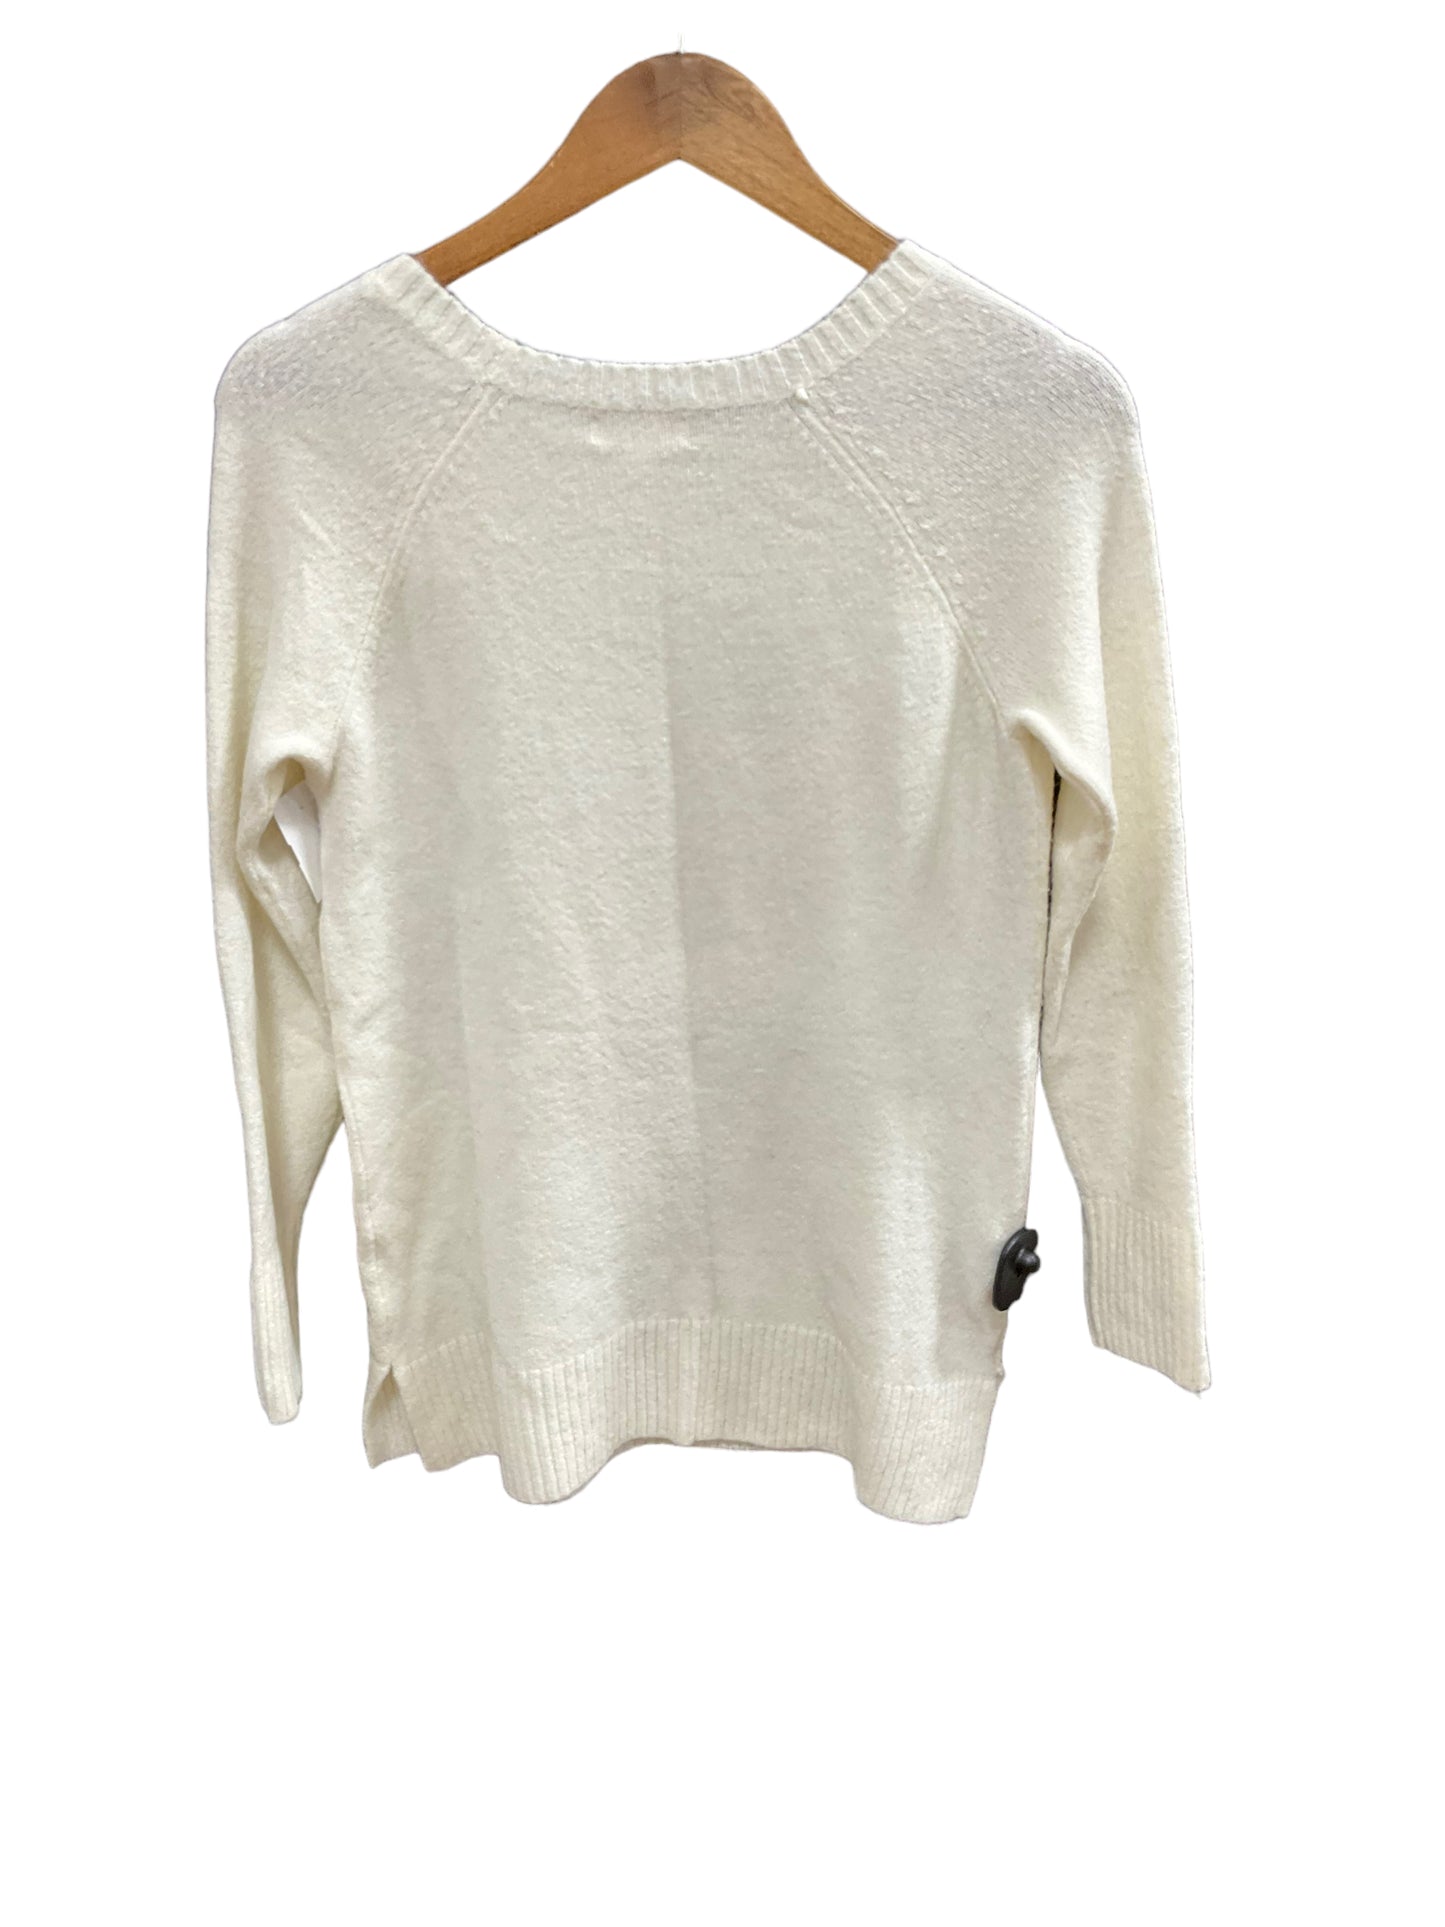 Sweater By Lc Lauren Conrad  Size: Xs